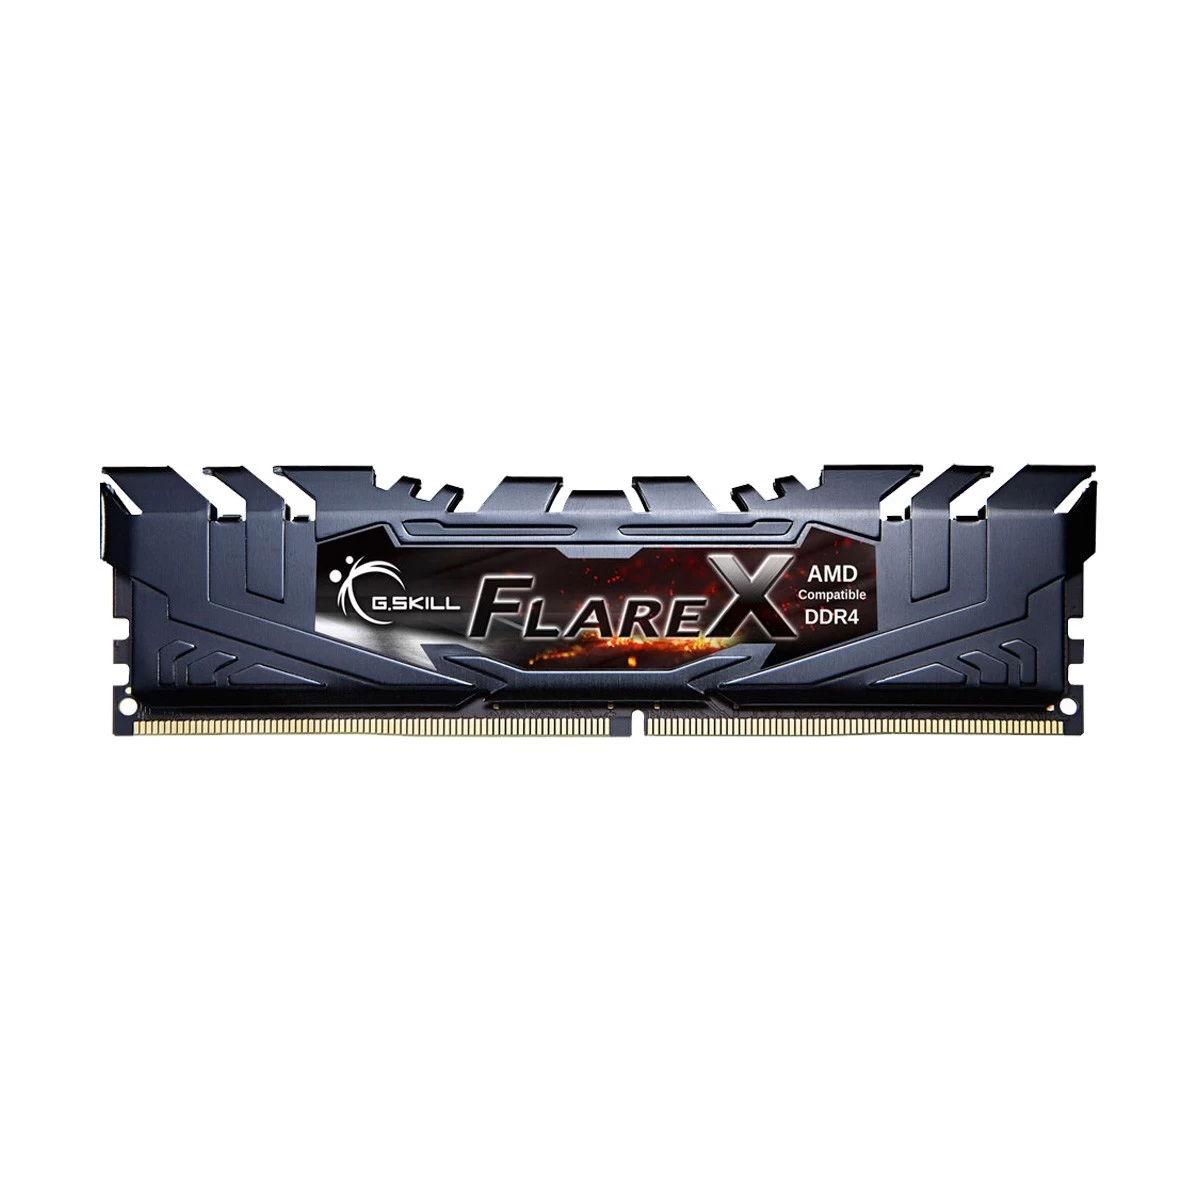 G.Skill 8GB DDR4 3200MHz Flare X (Recomended with AMD Ryzen) Desktop RAM